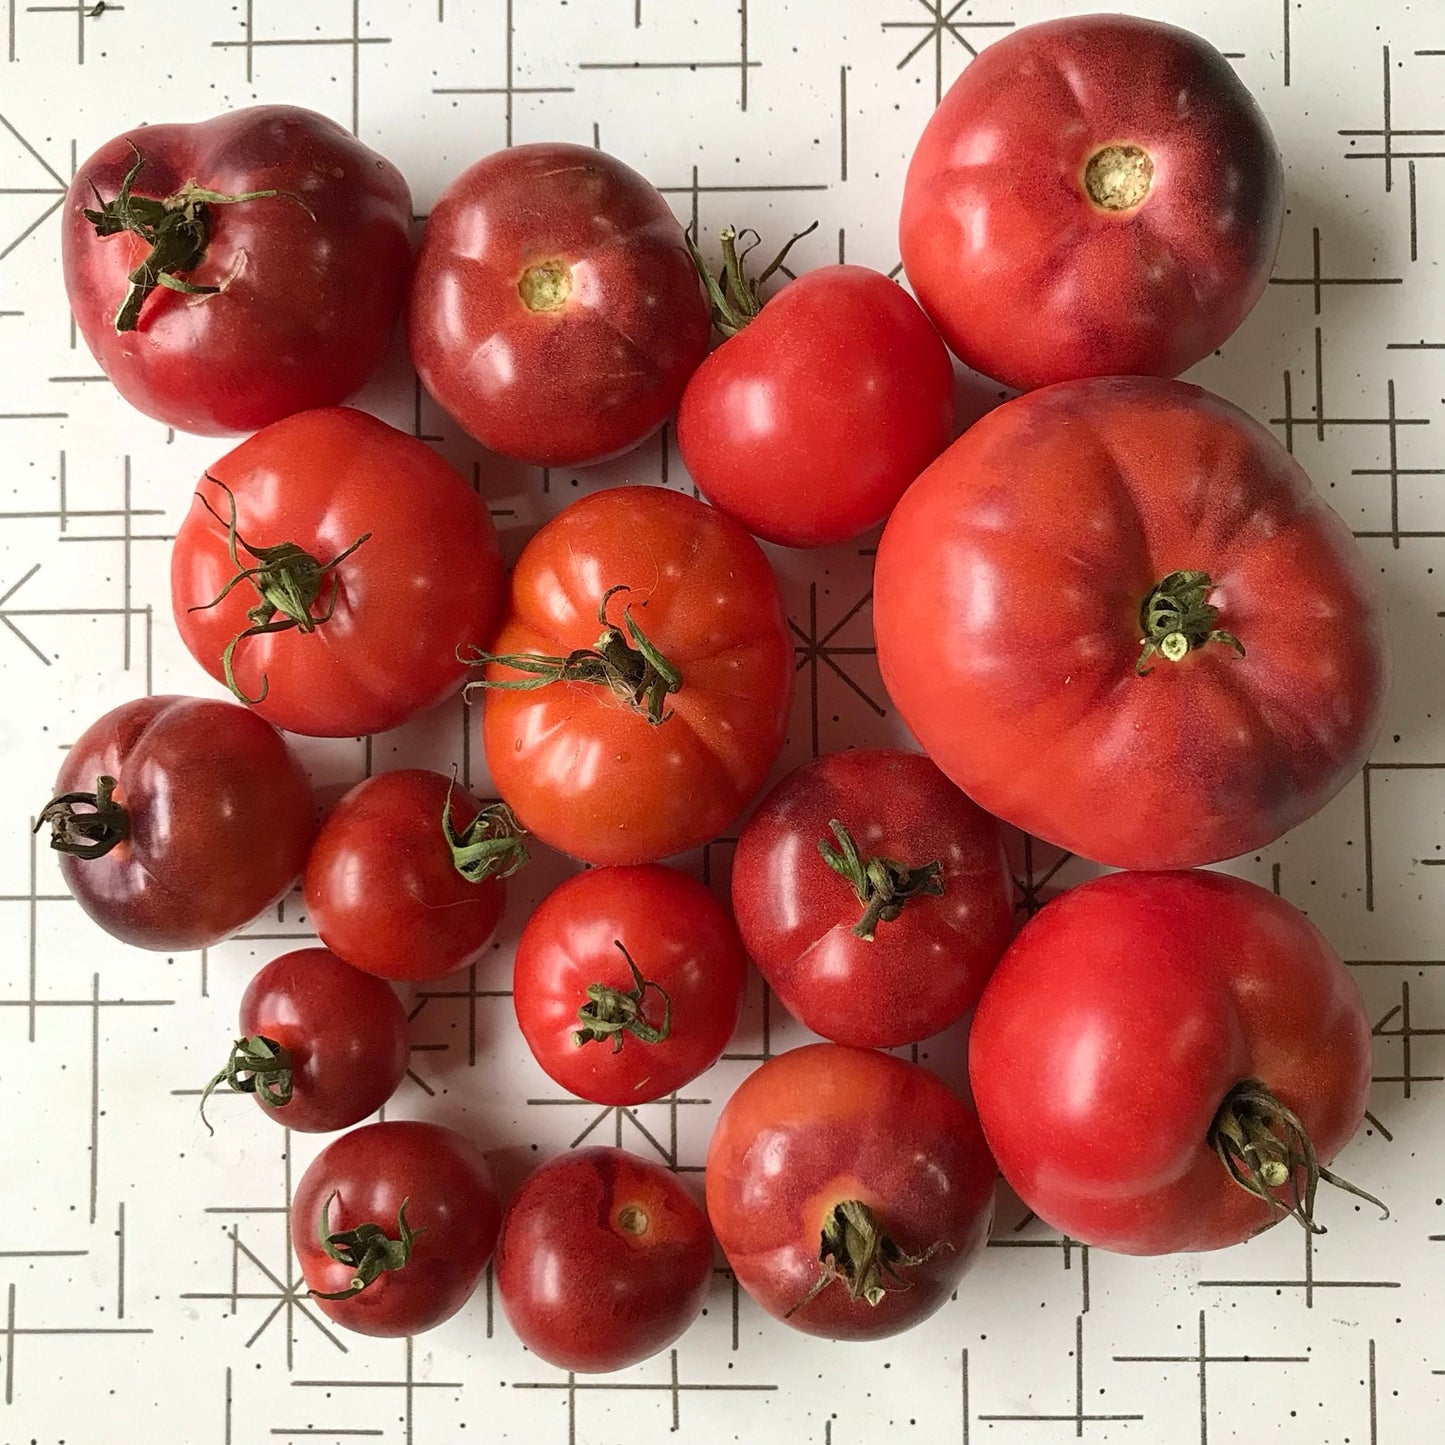 Small and large shiny red tomatoes with light anthocyanin shoulders.